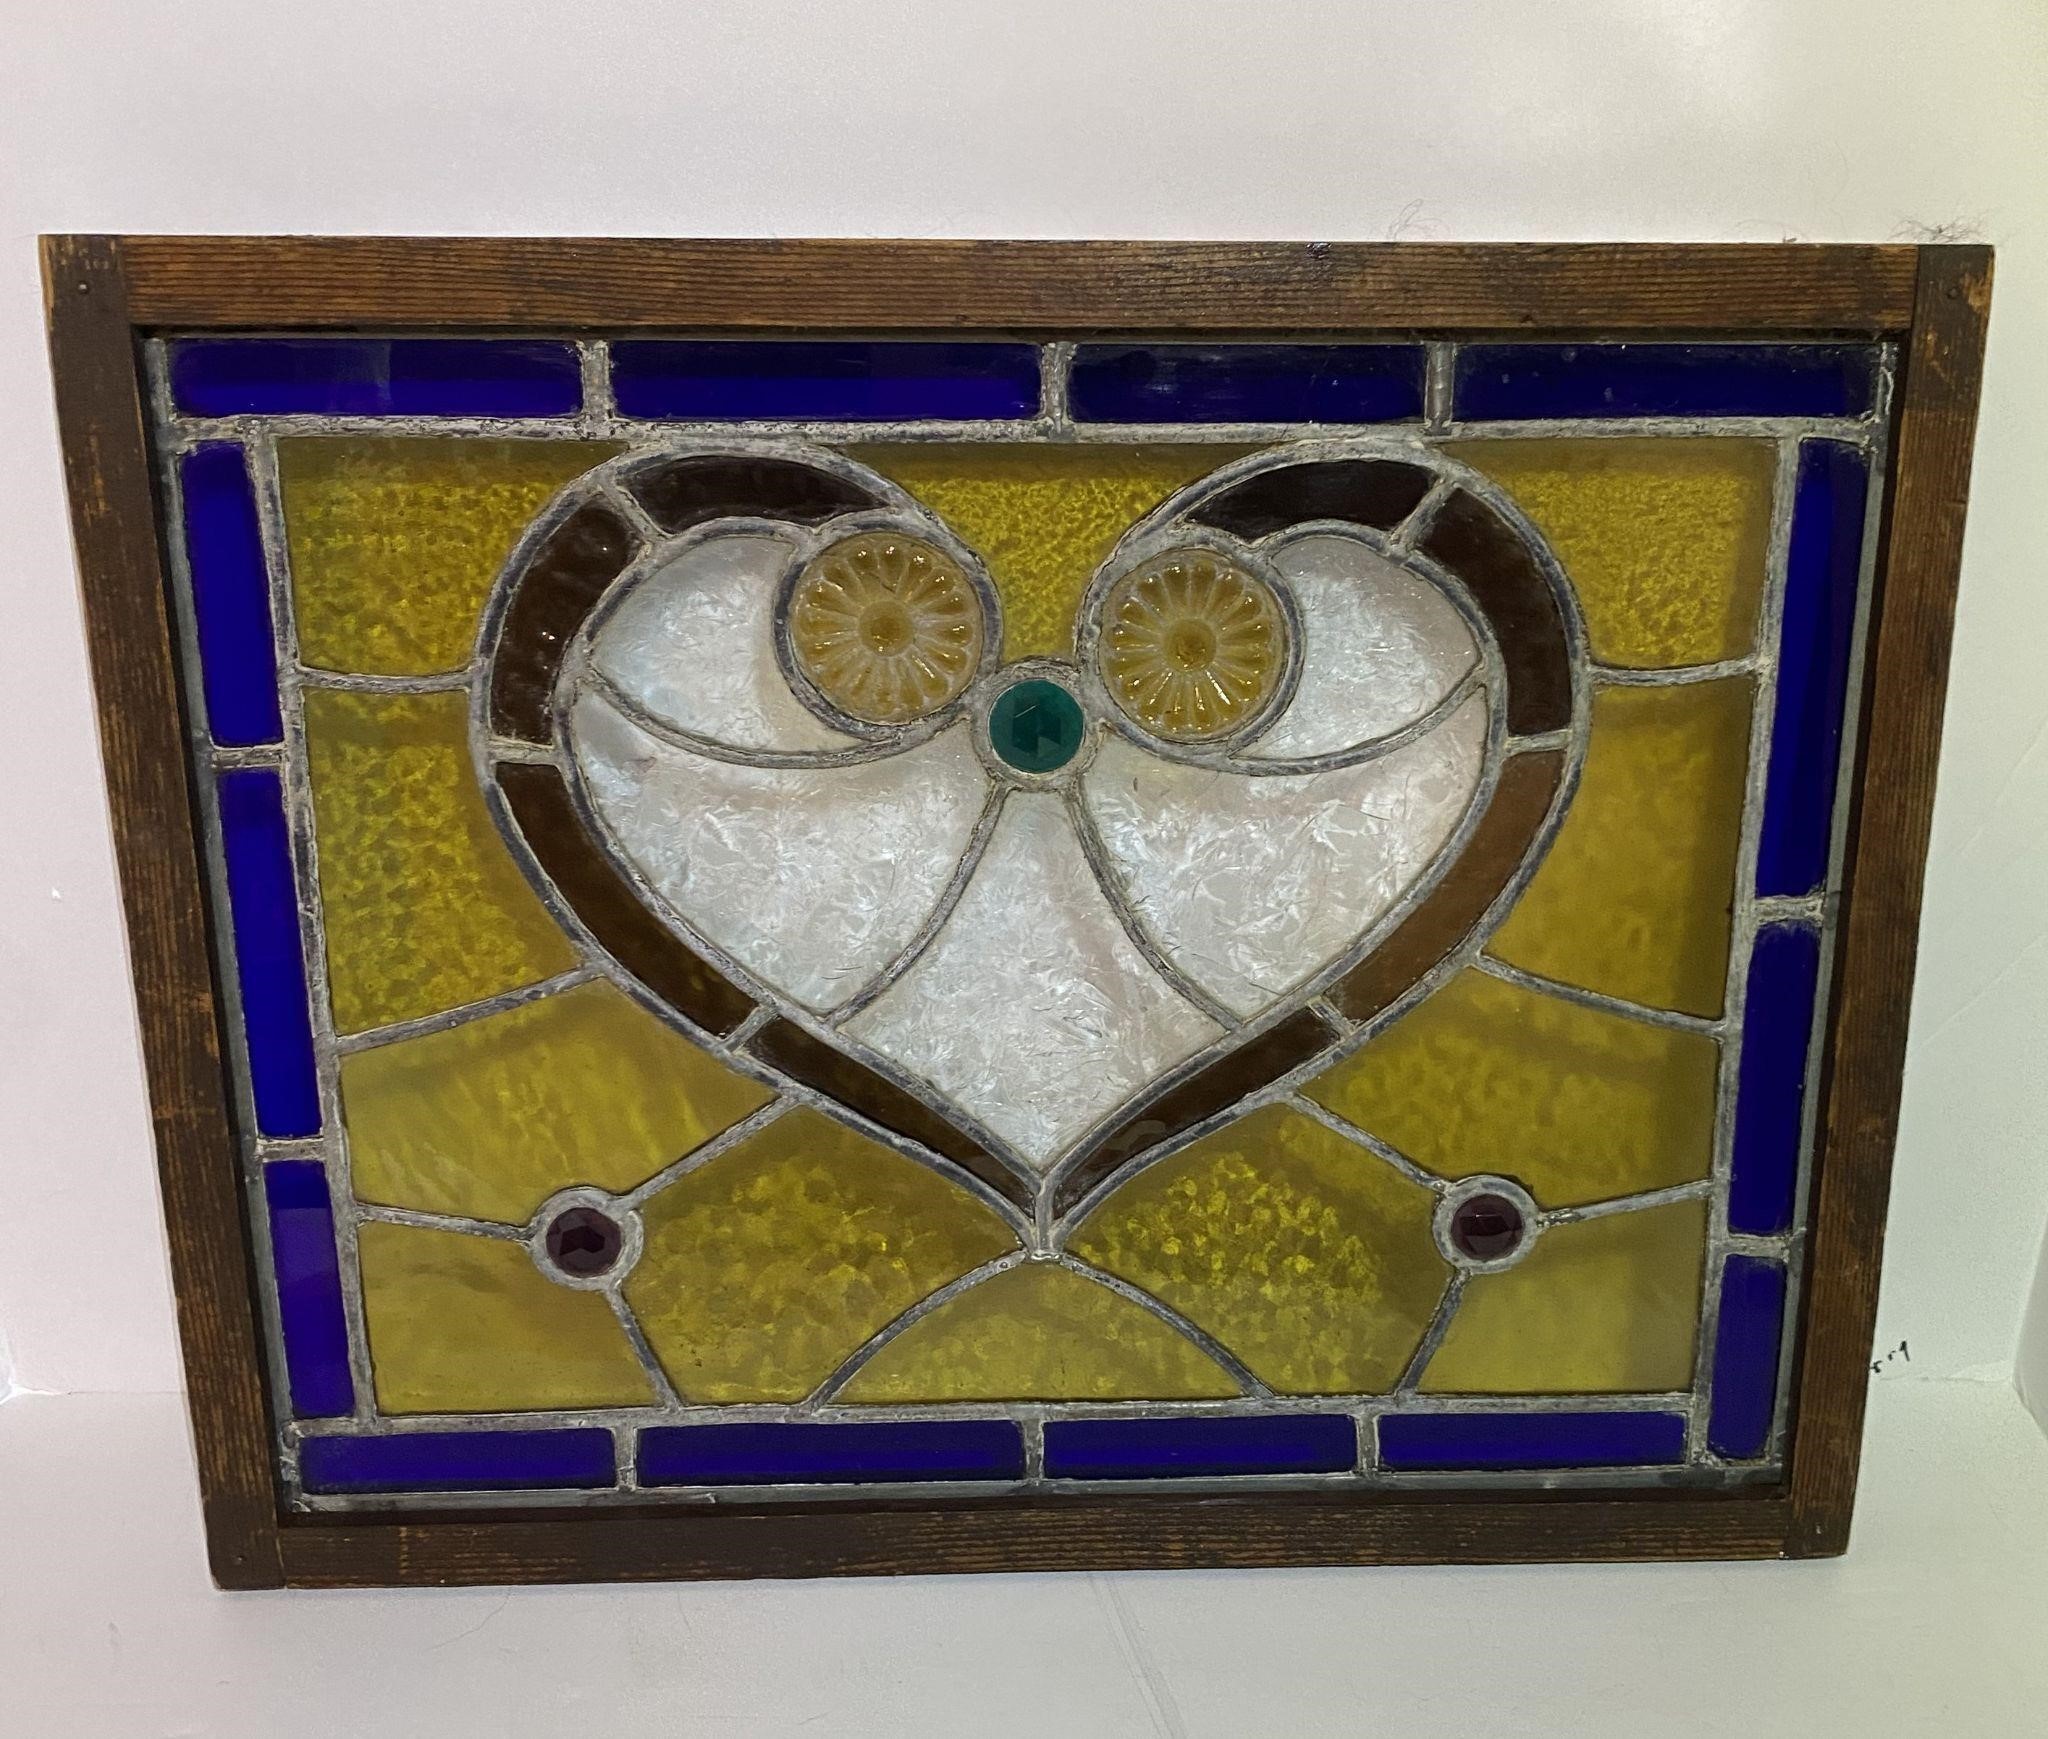 Stained Glass Panel with Heart Design